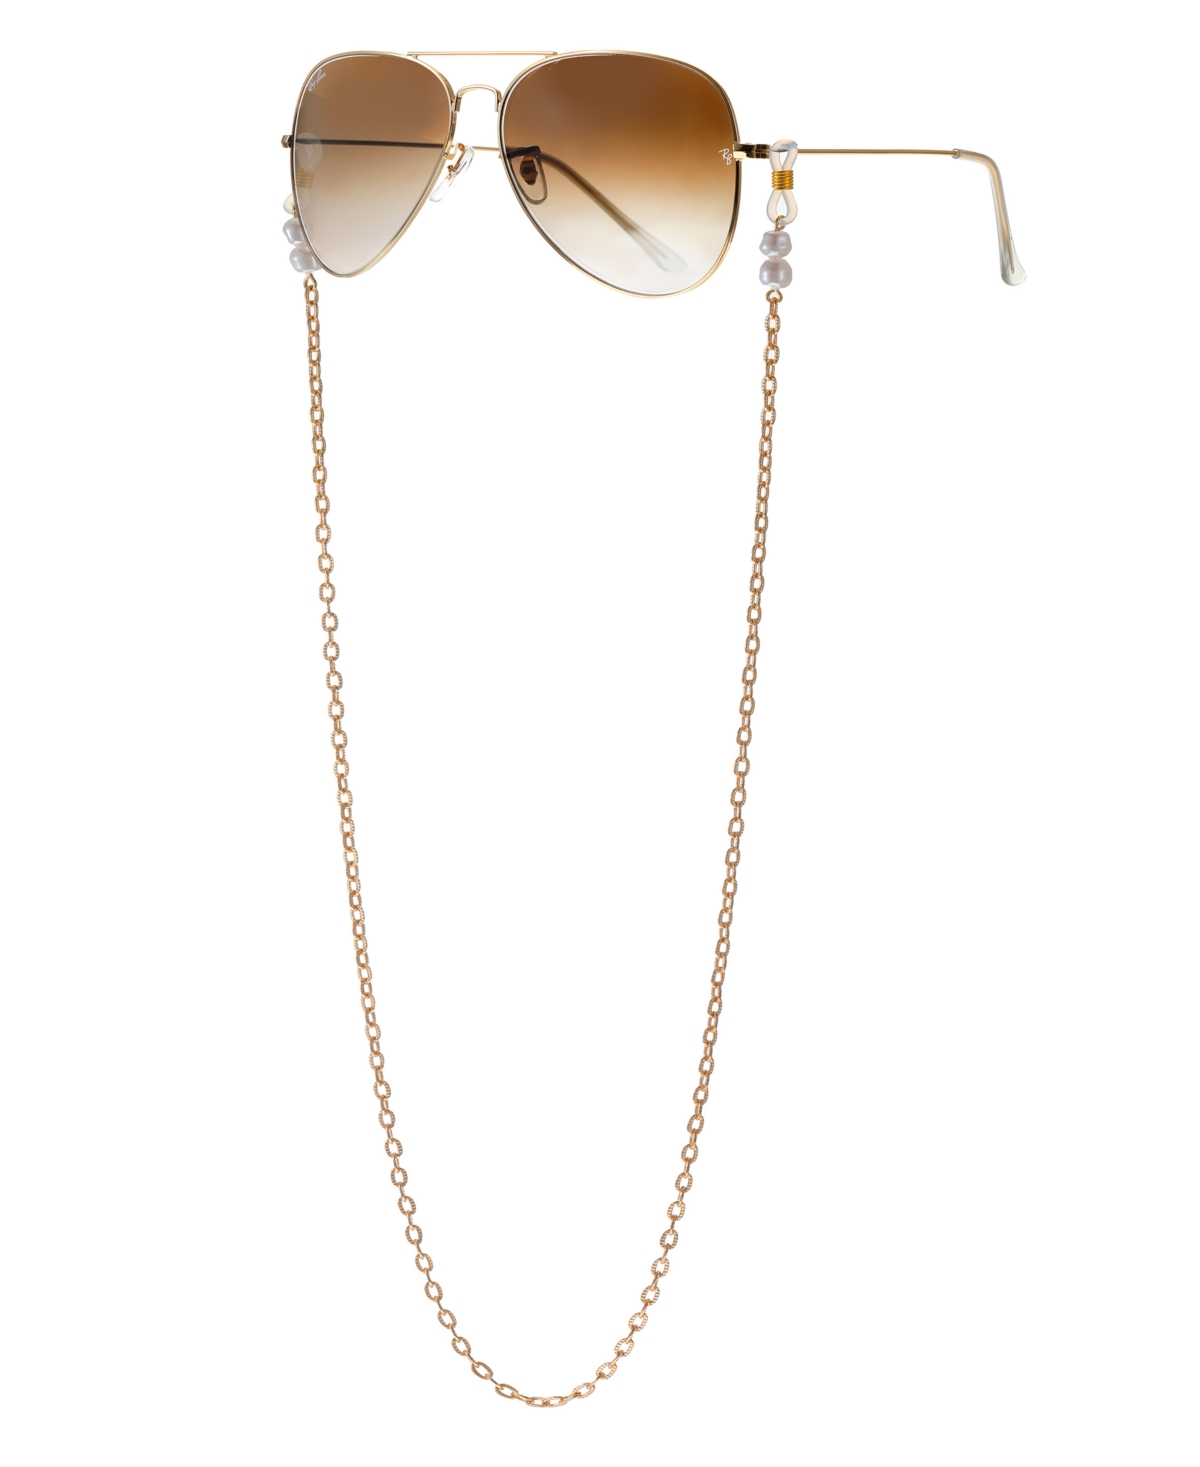 Women's 18k Gold Plated Wide Link Imitation Pearl Glasses Chain - Gold-Plated